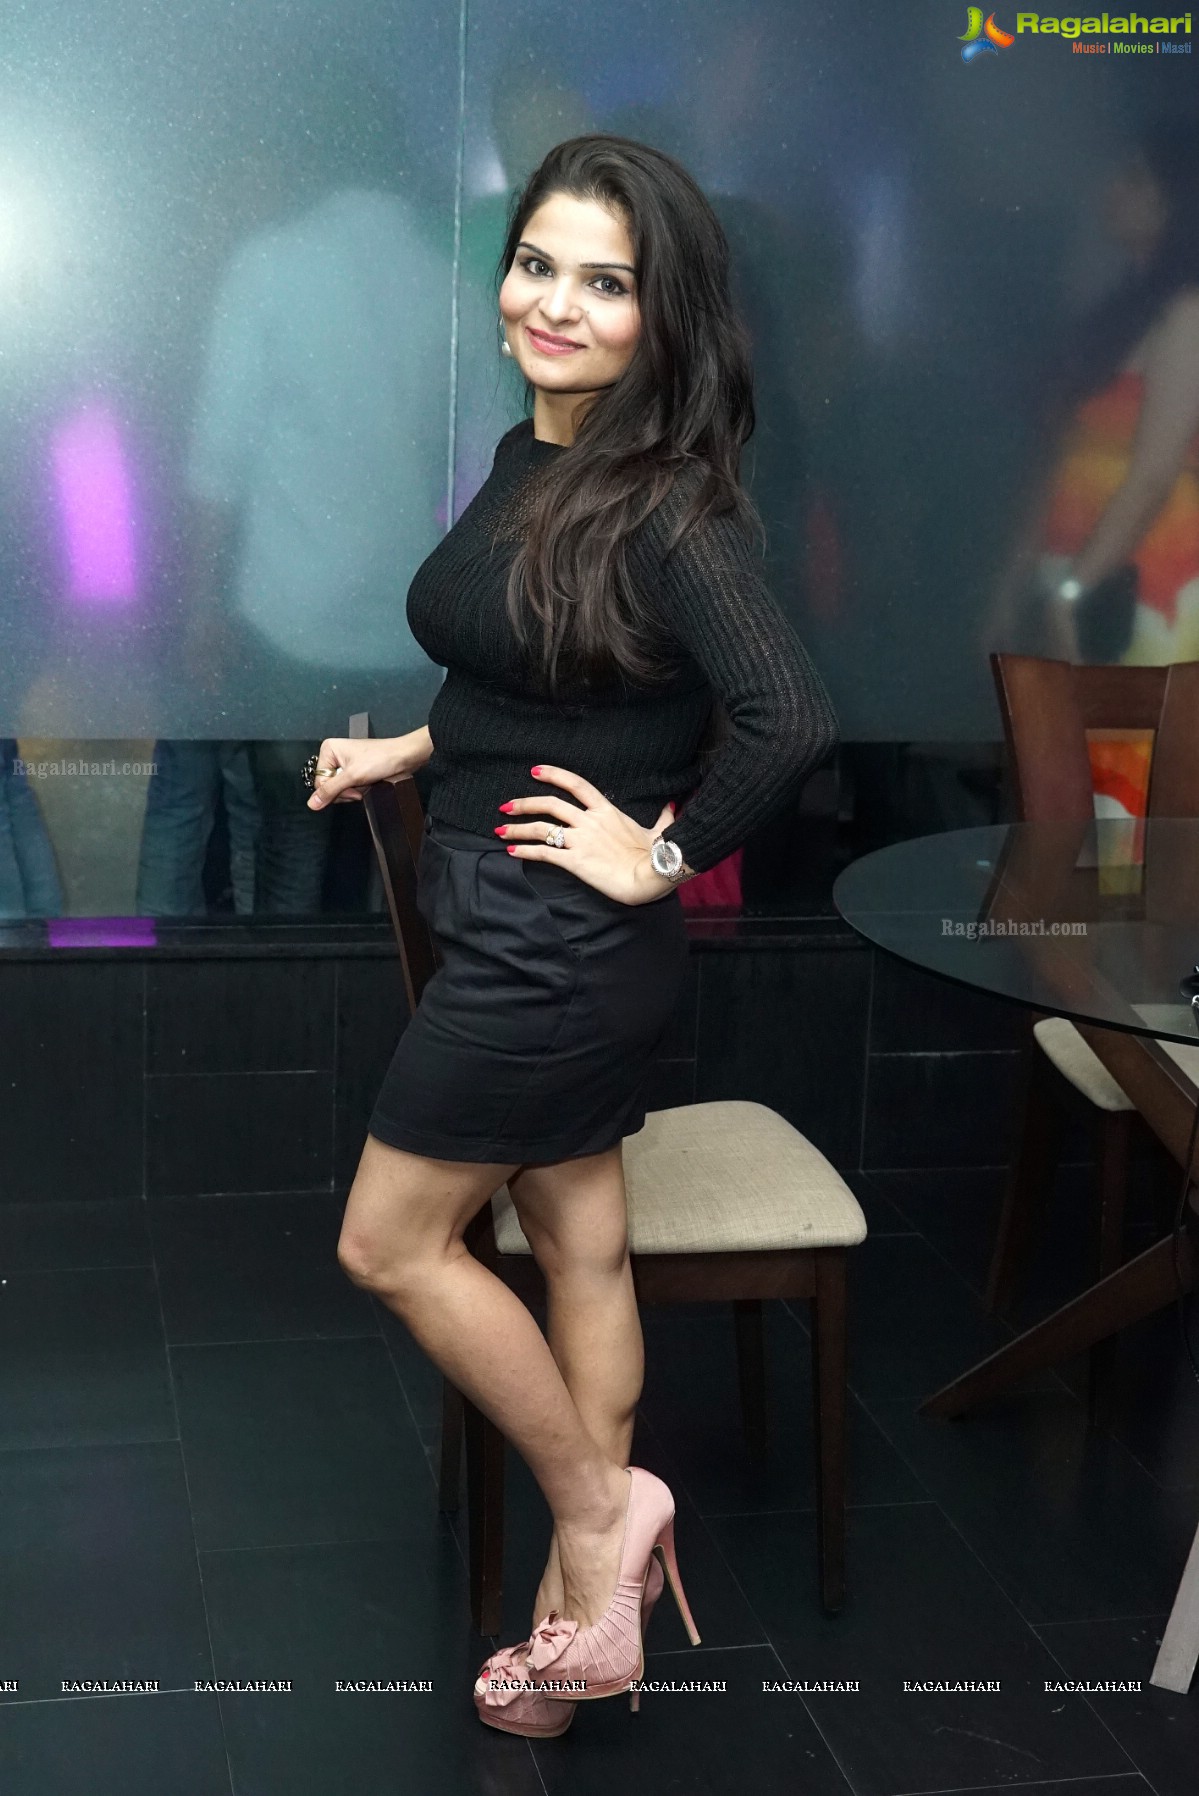 Grand Launch Party of Klub Trinity, Jubilee Hills, Hyderabad